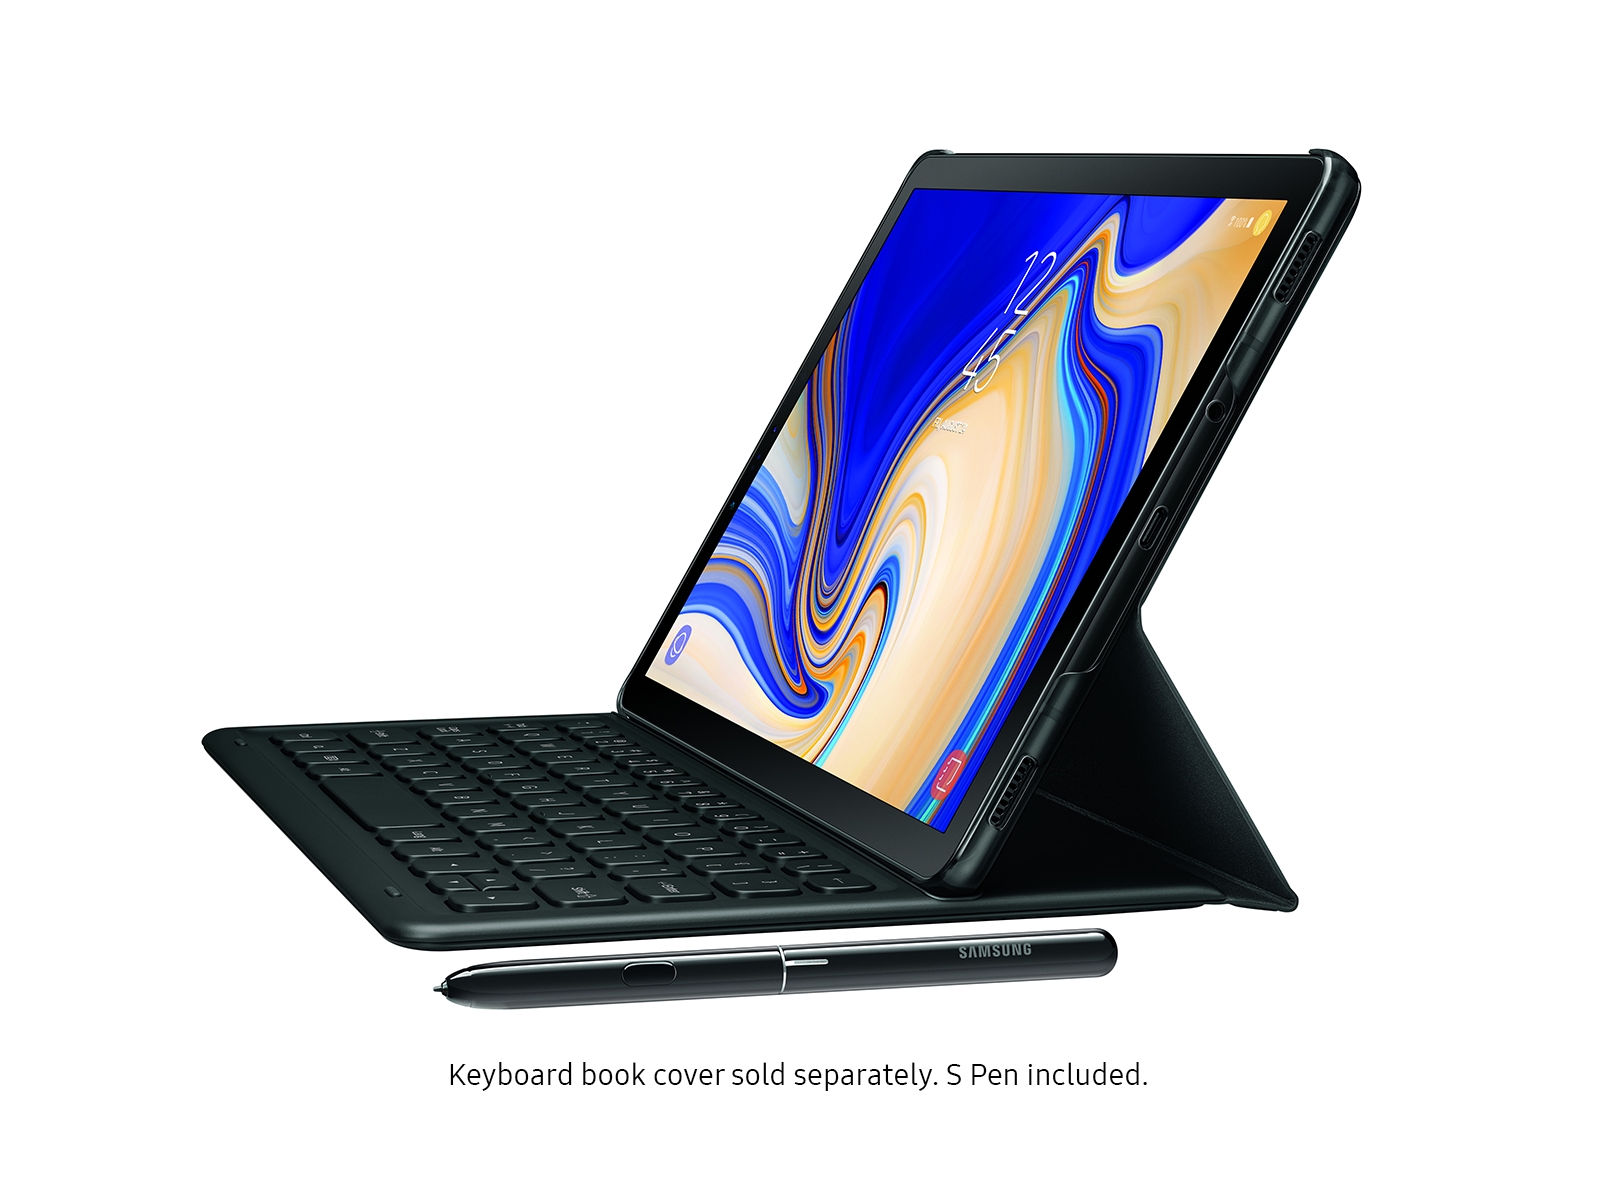 Thumbnail image of Galaxy Tab S4 10.5”, 256GB, Black (Wi-Fi) S Pen included